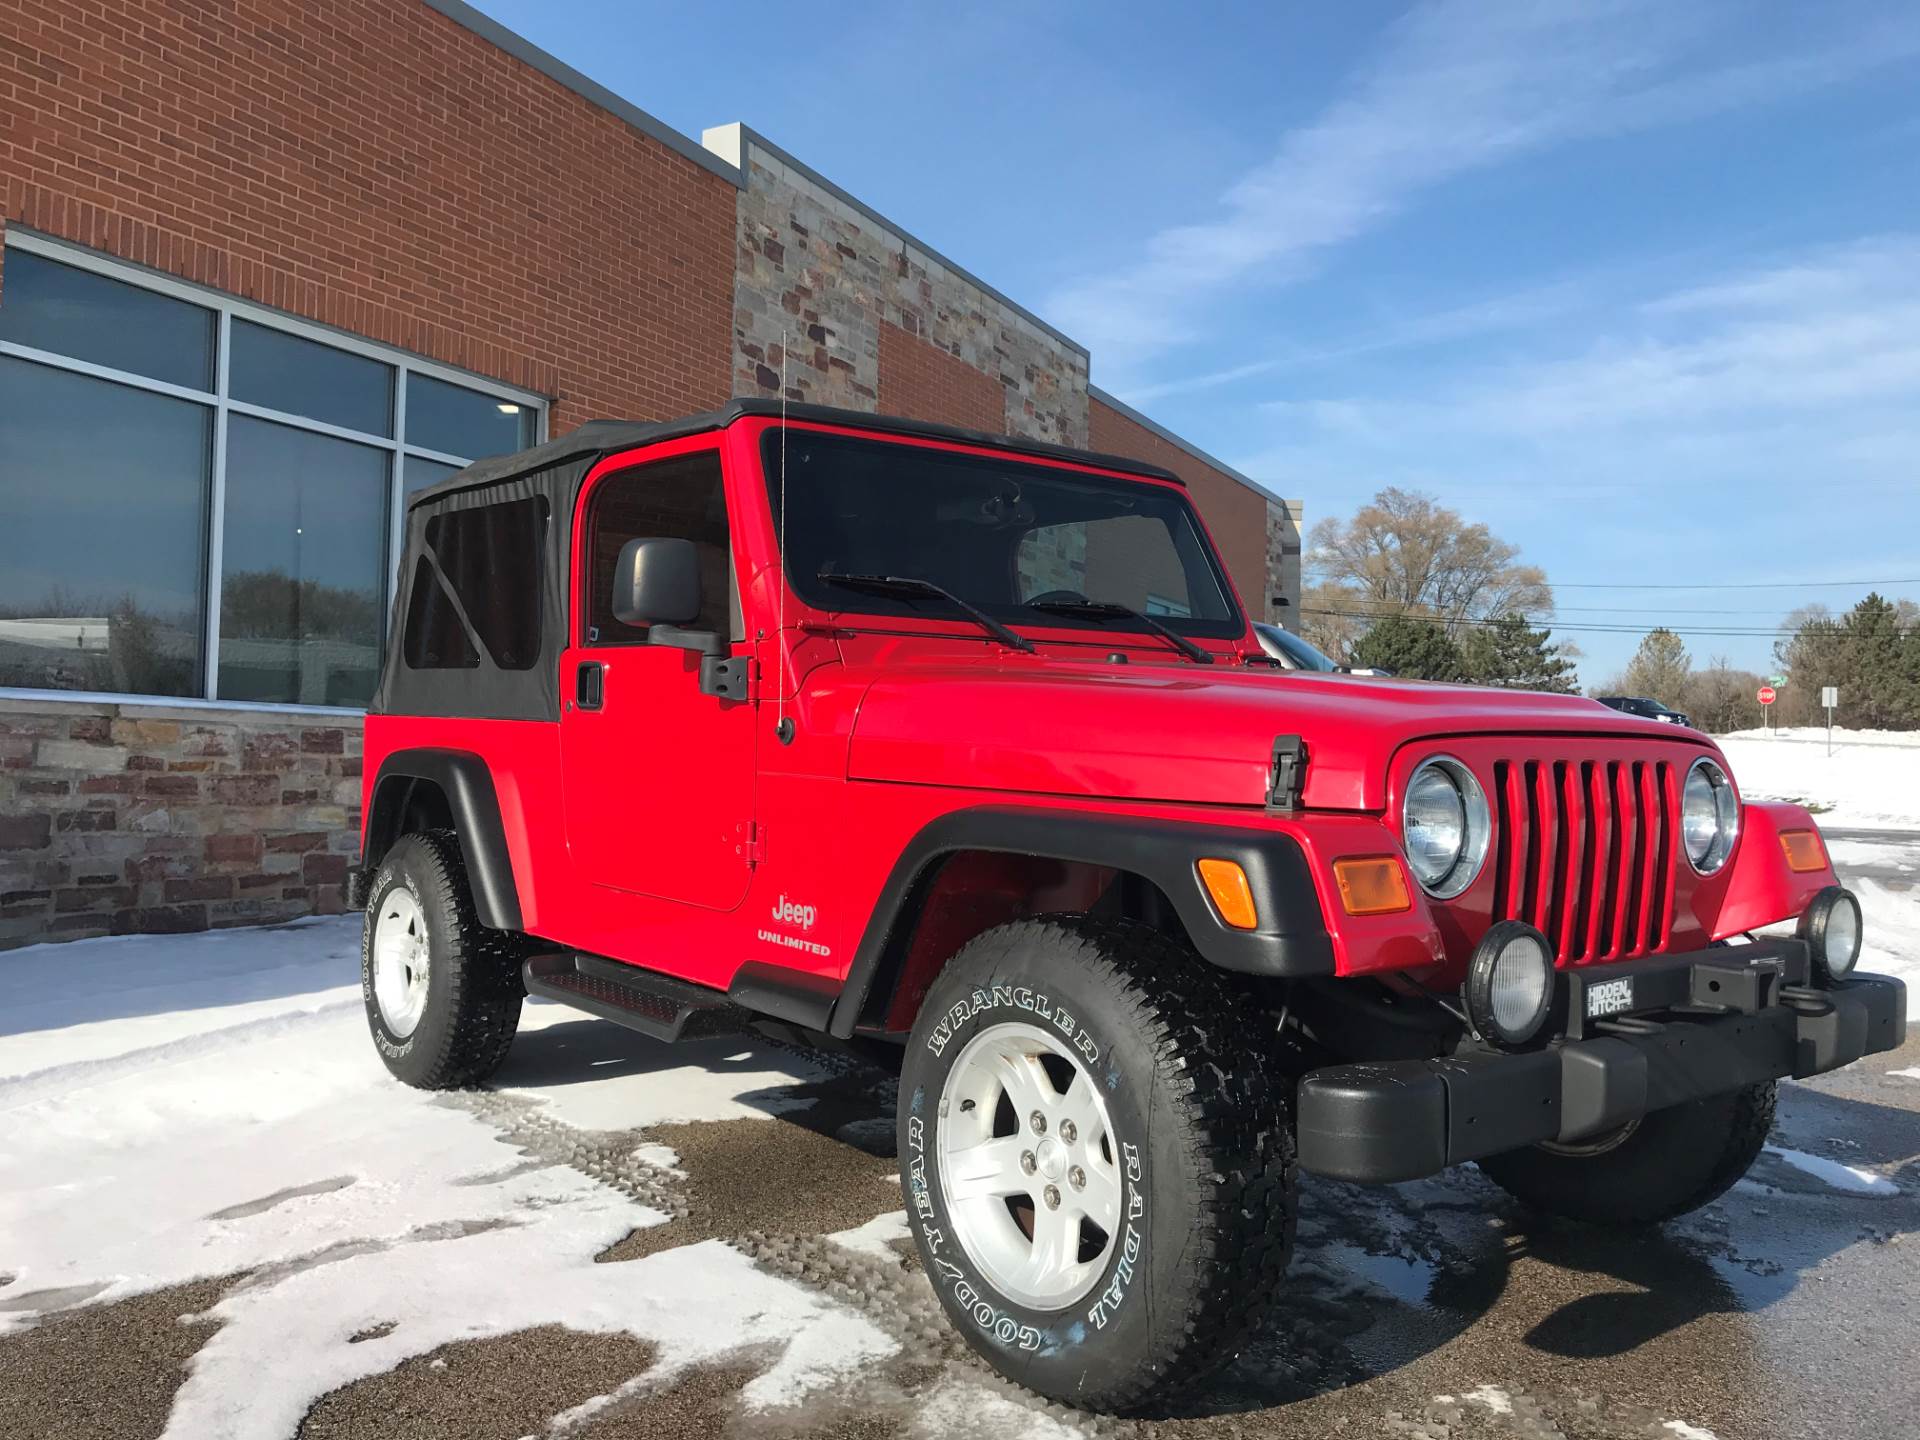 Used 2004 Jeep® Wrangler Unlimited | Automobile in Big Bend WI | 4104J Red